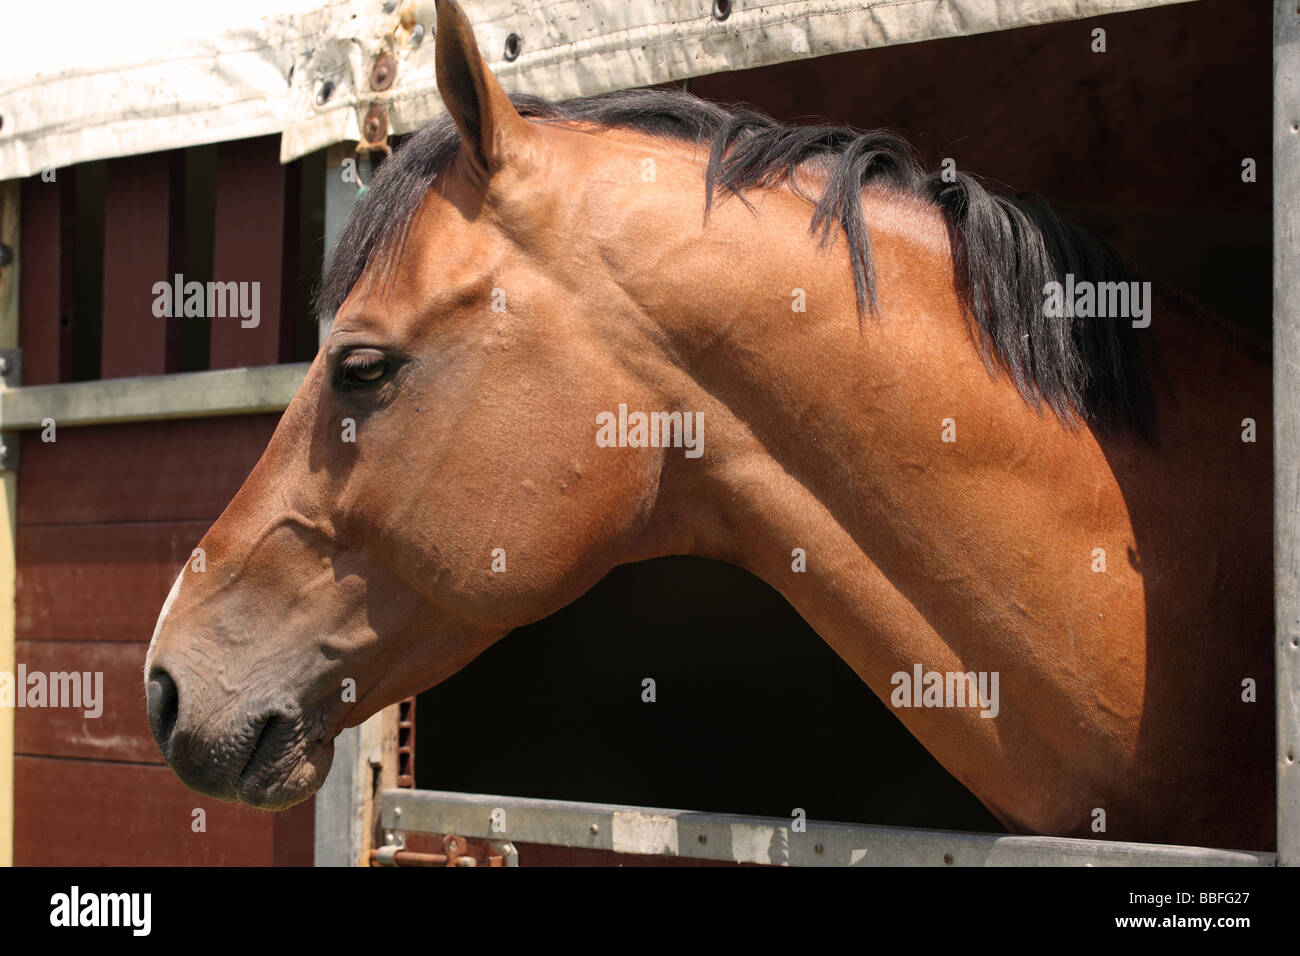 Close up of a brown horse head looking over the stable door, UK Stock Photo